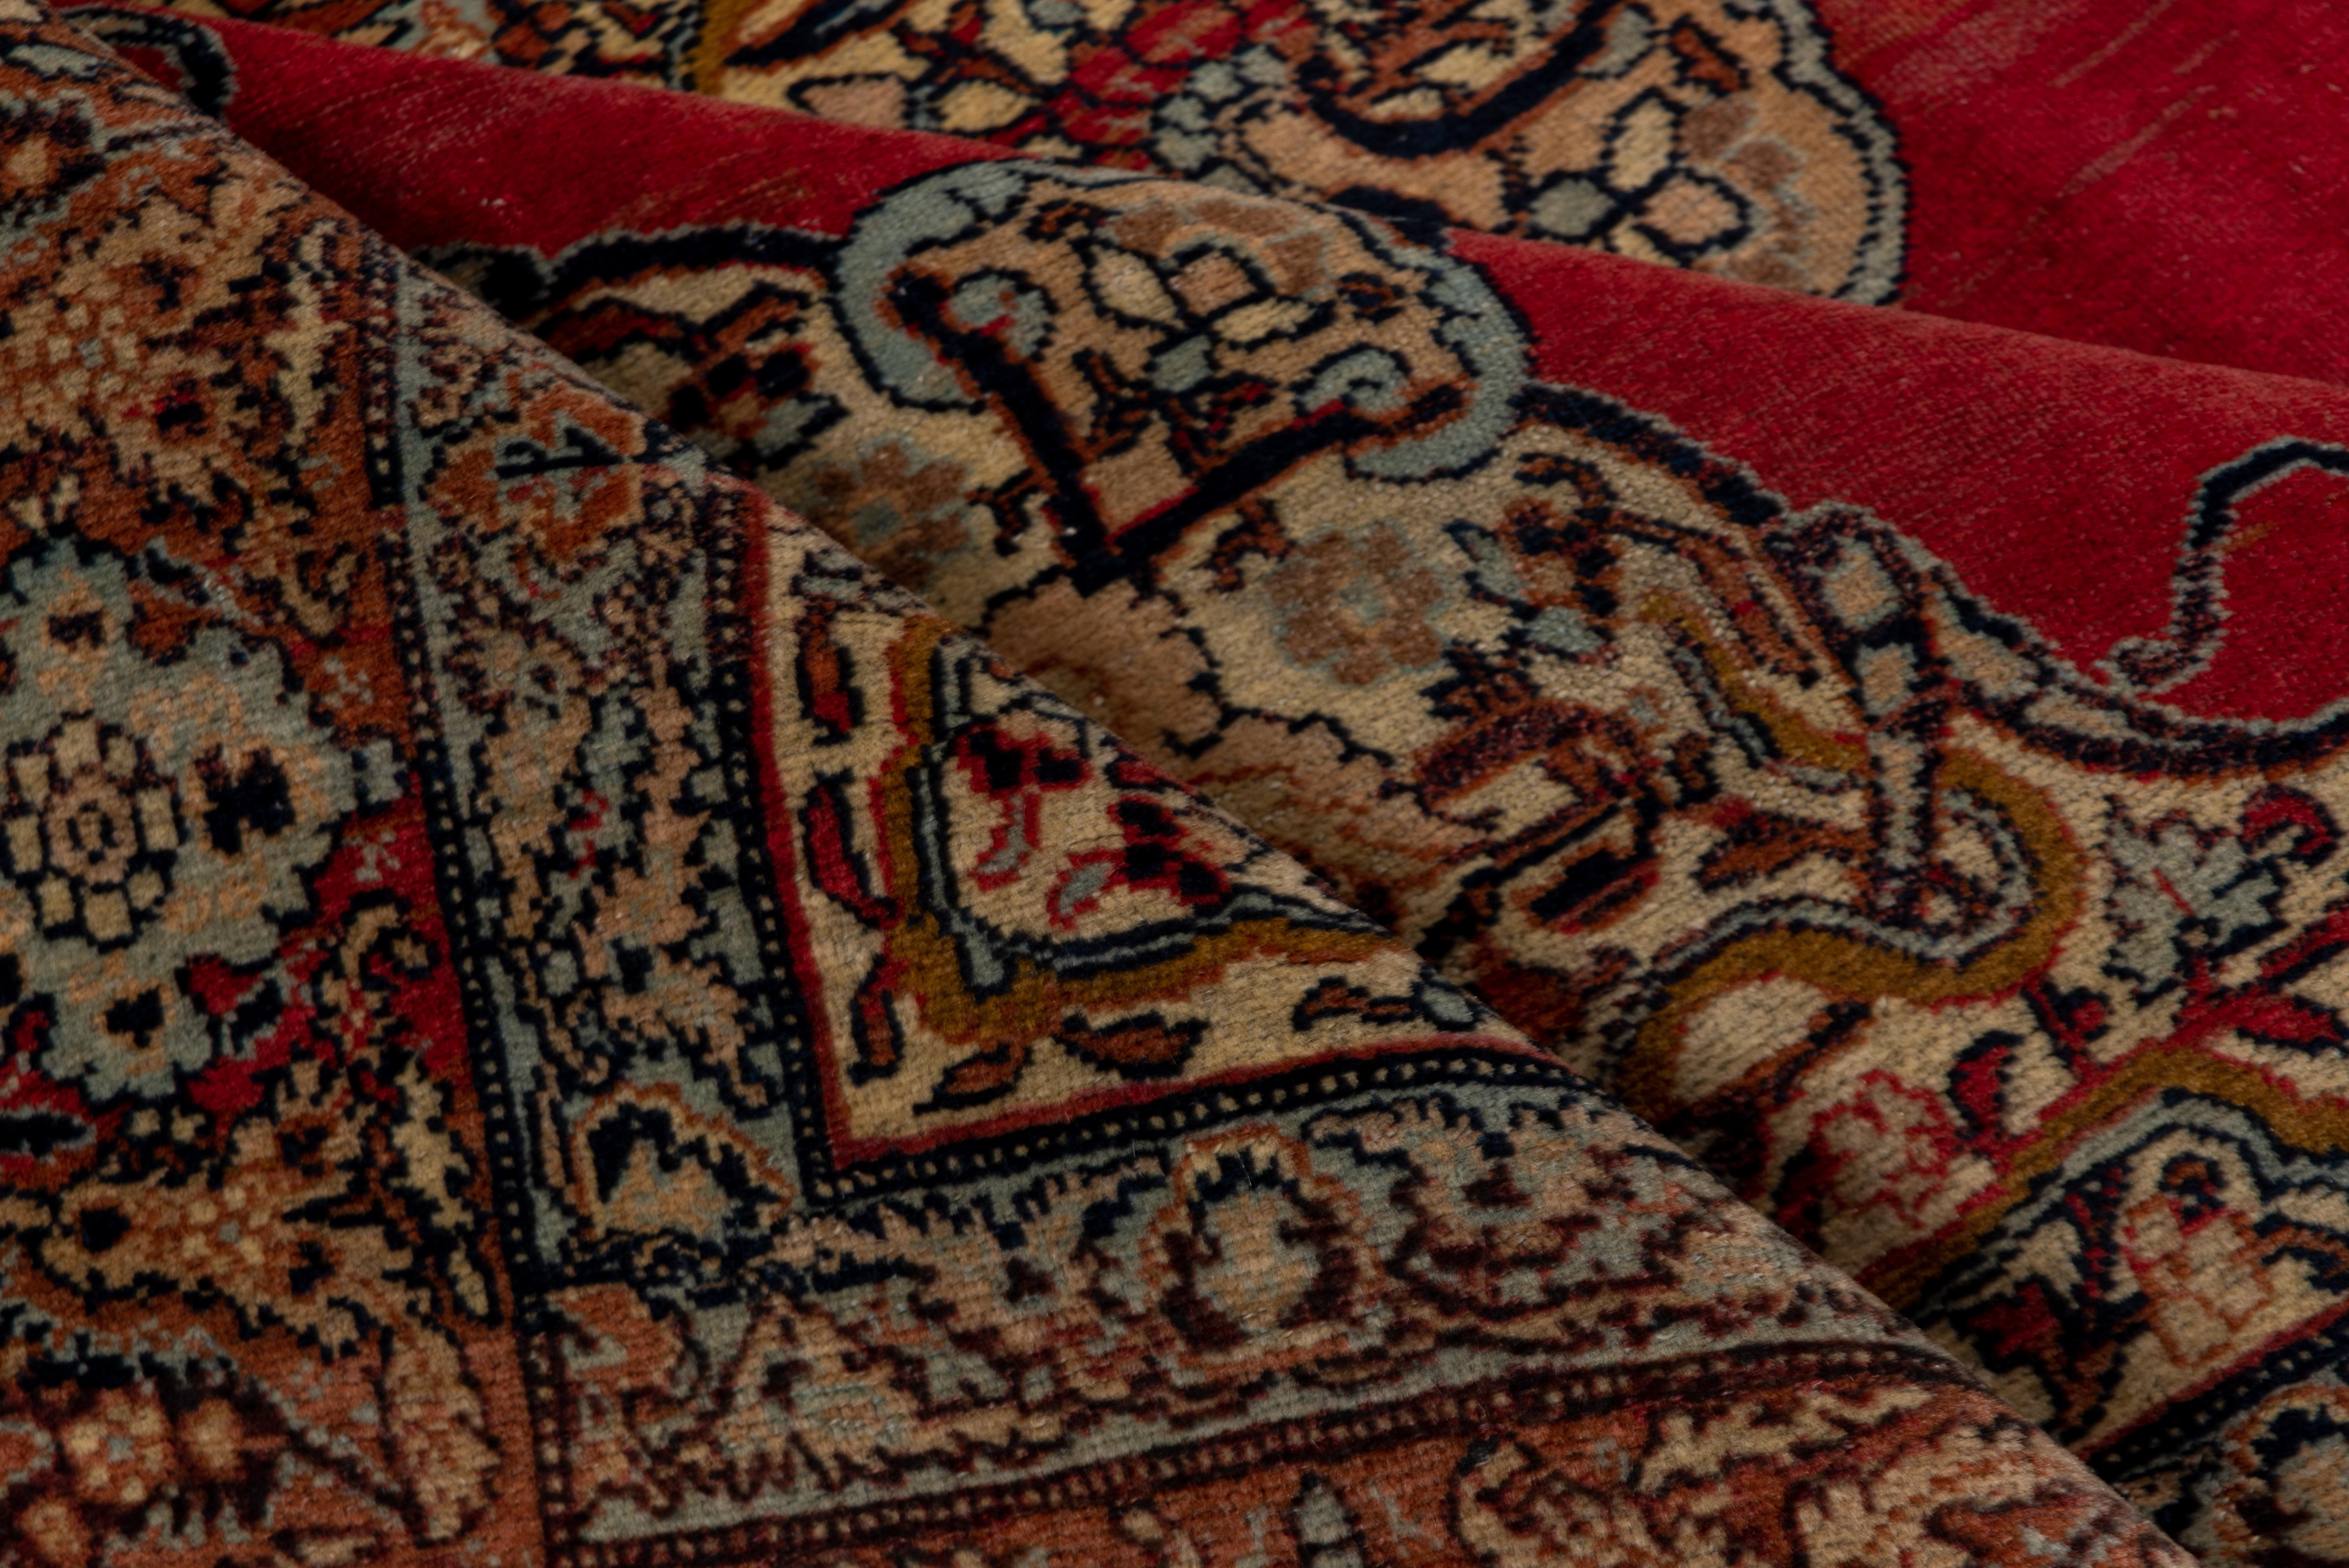 This antique Tabriz rug has a sand-straw four pendant medallion with an inner decor of tightly layered arabesques and cloud bands is set on the open ruby red field within en suite corners with more snaky cloud bands. Salmon-pink border of softly